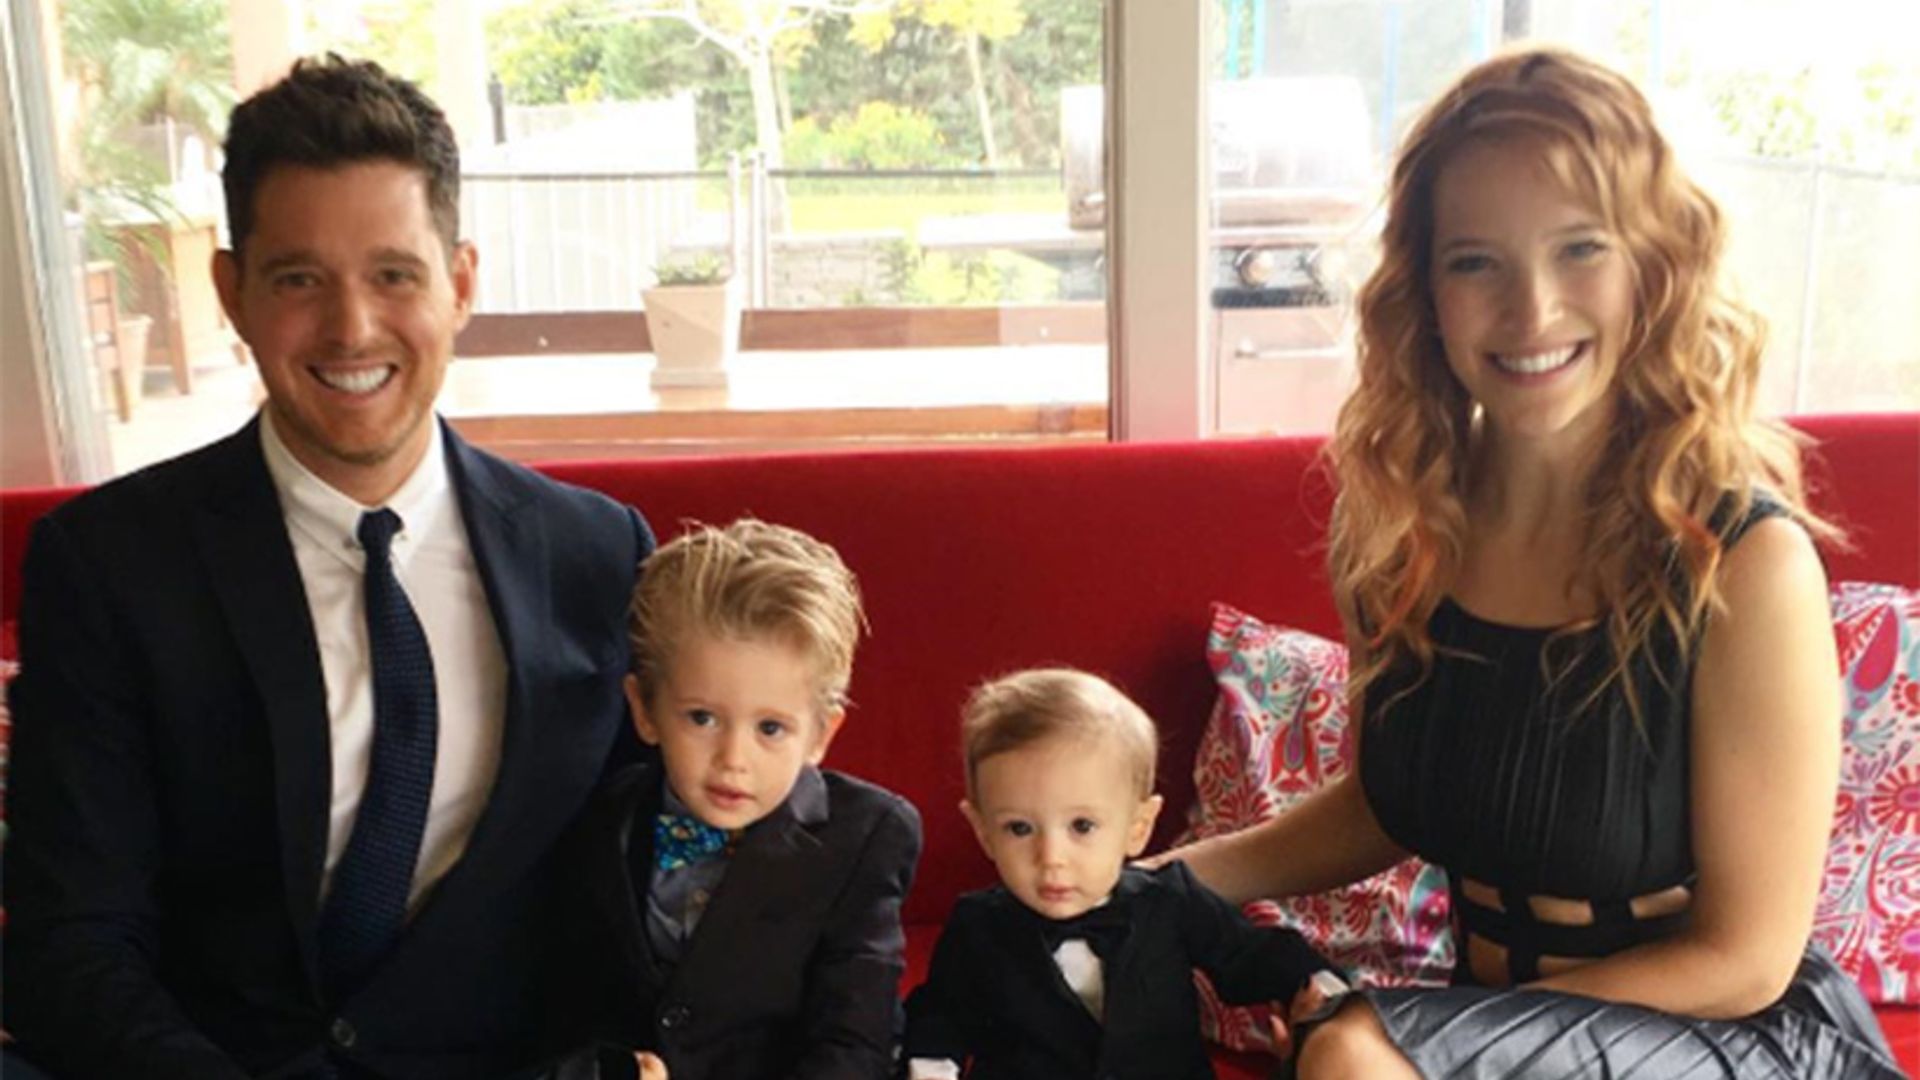 Noah Buble's aunt responds to reports he is cancer-free: 'Noah is doing well'